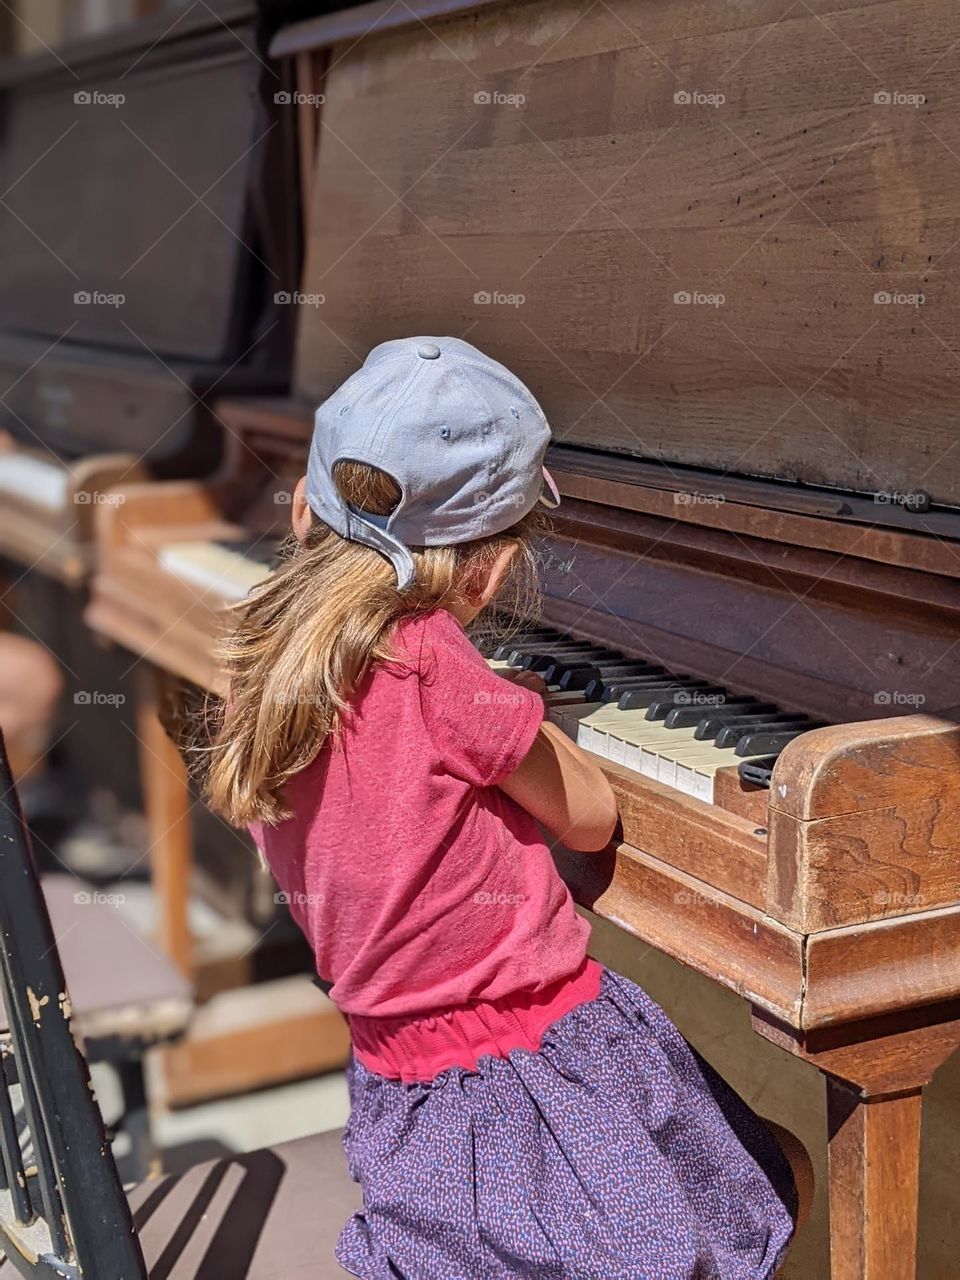 kid with cap playing the piano in the street